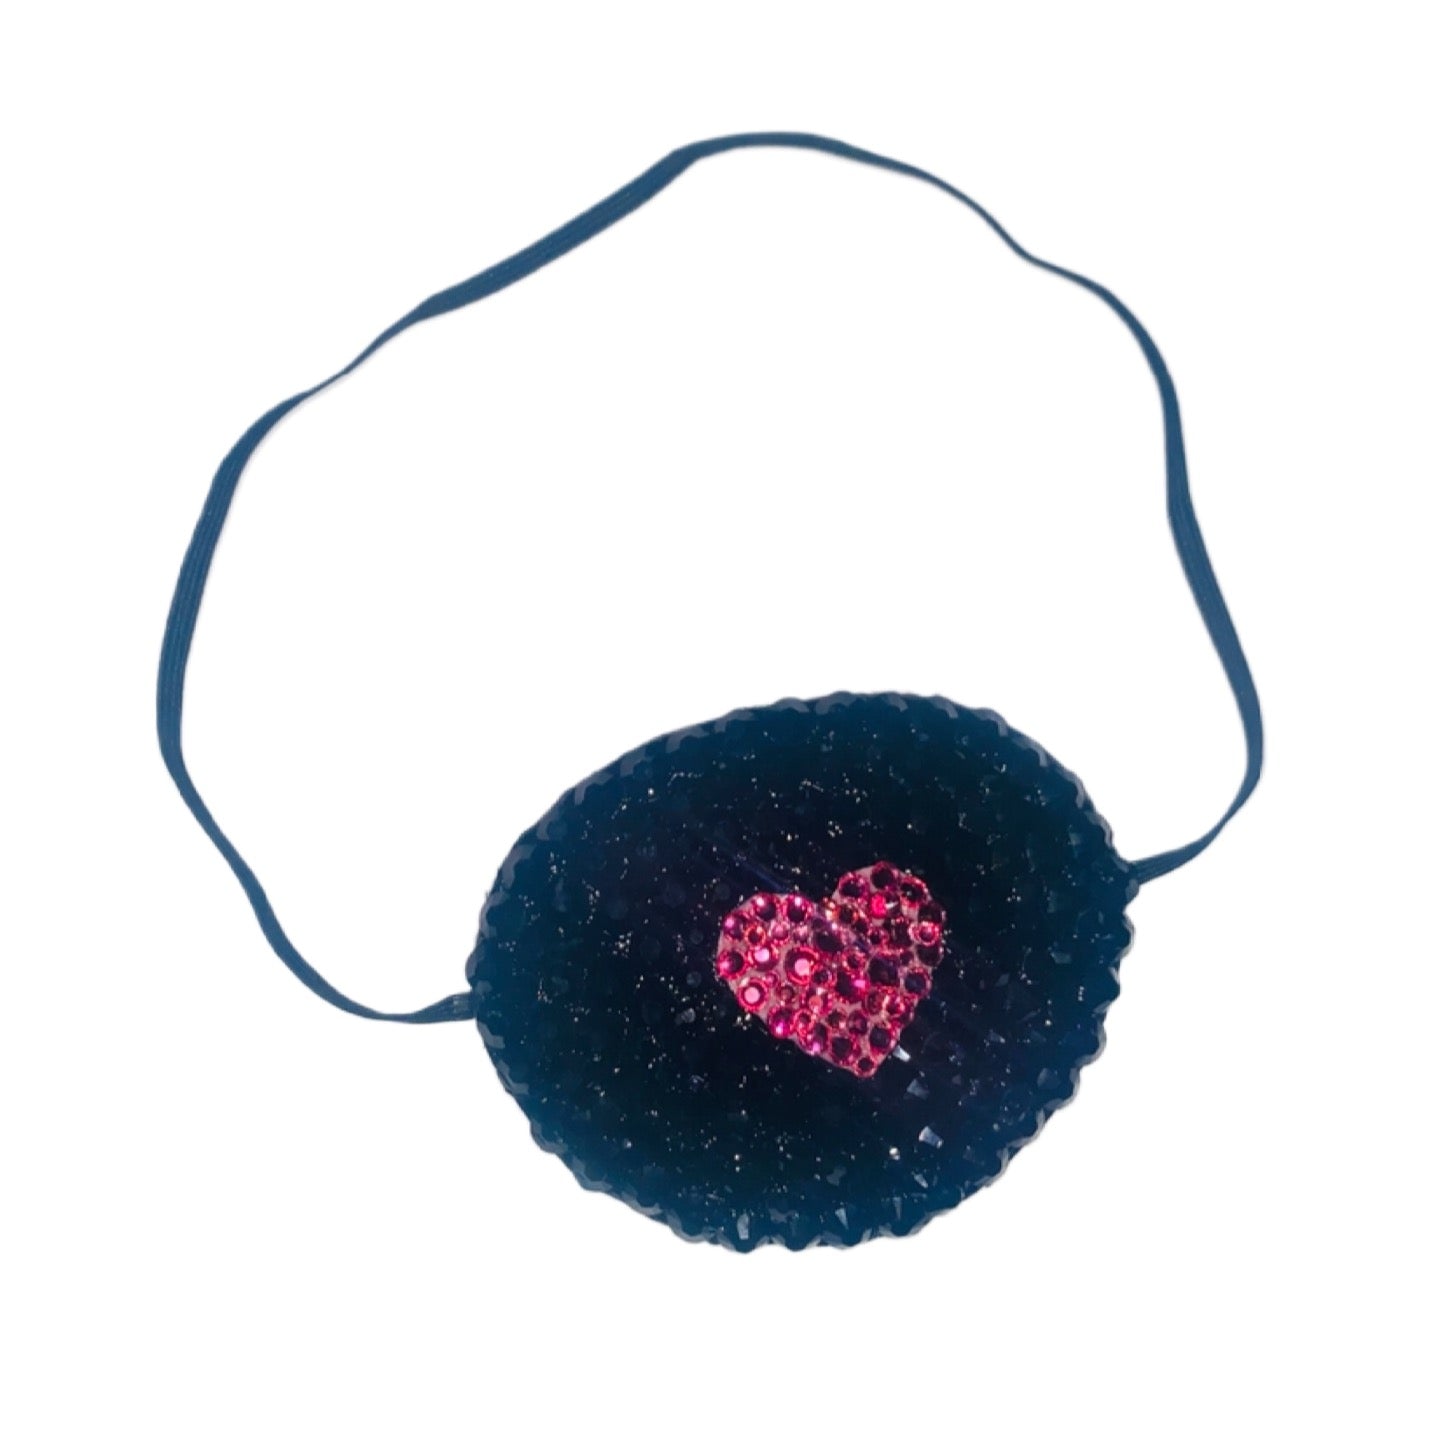 Black Eye Patch Bedazzled In Jet Black Luxe Crystal With Rose Pink Heart